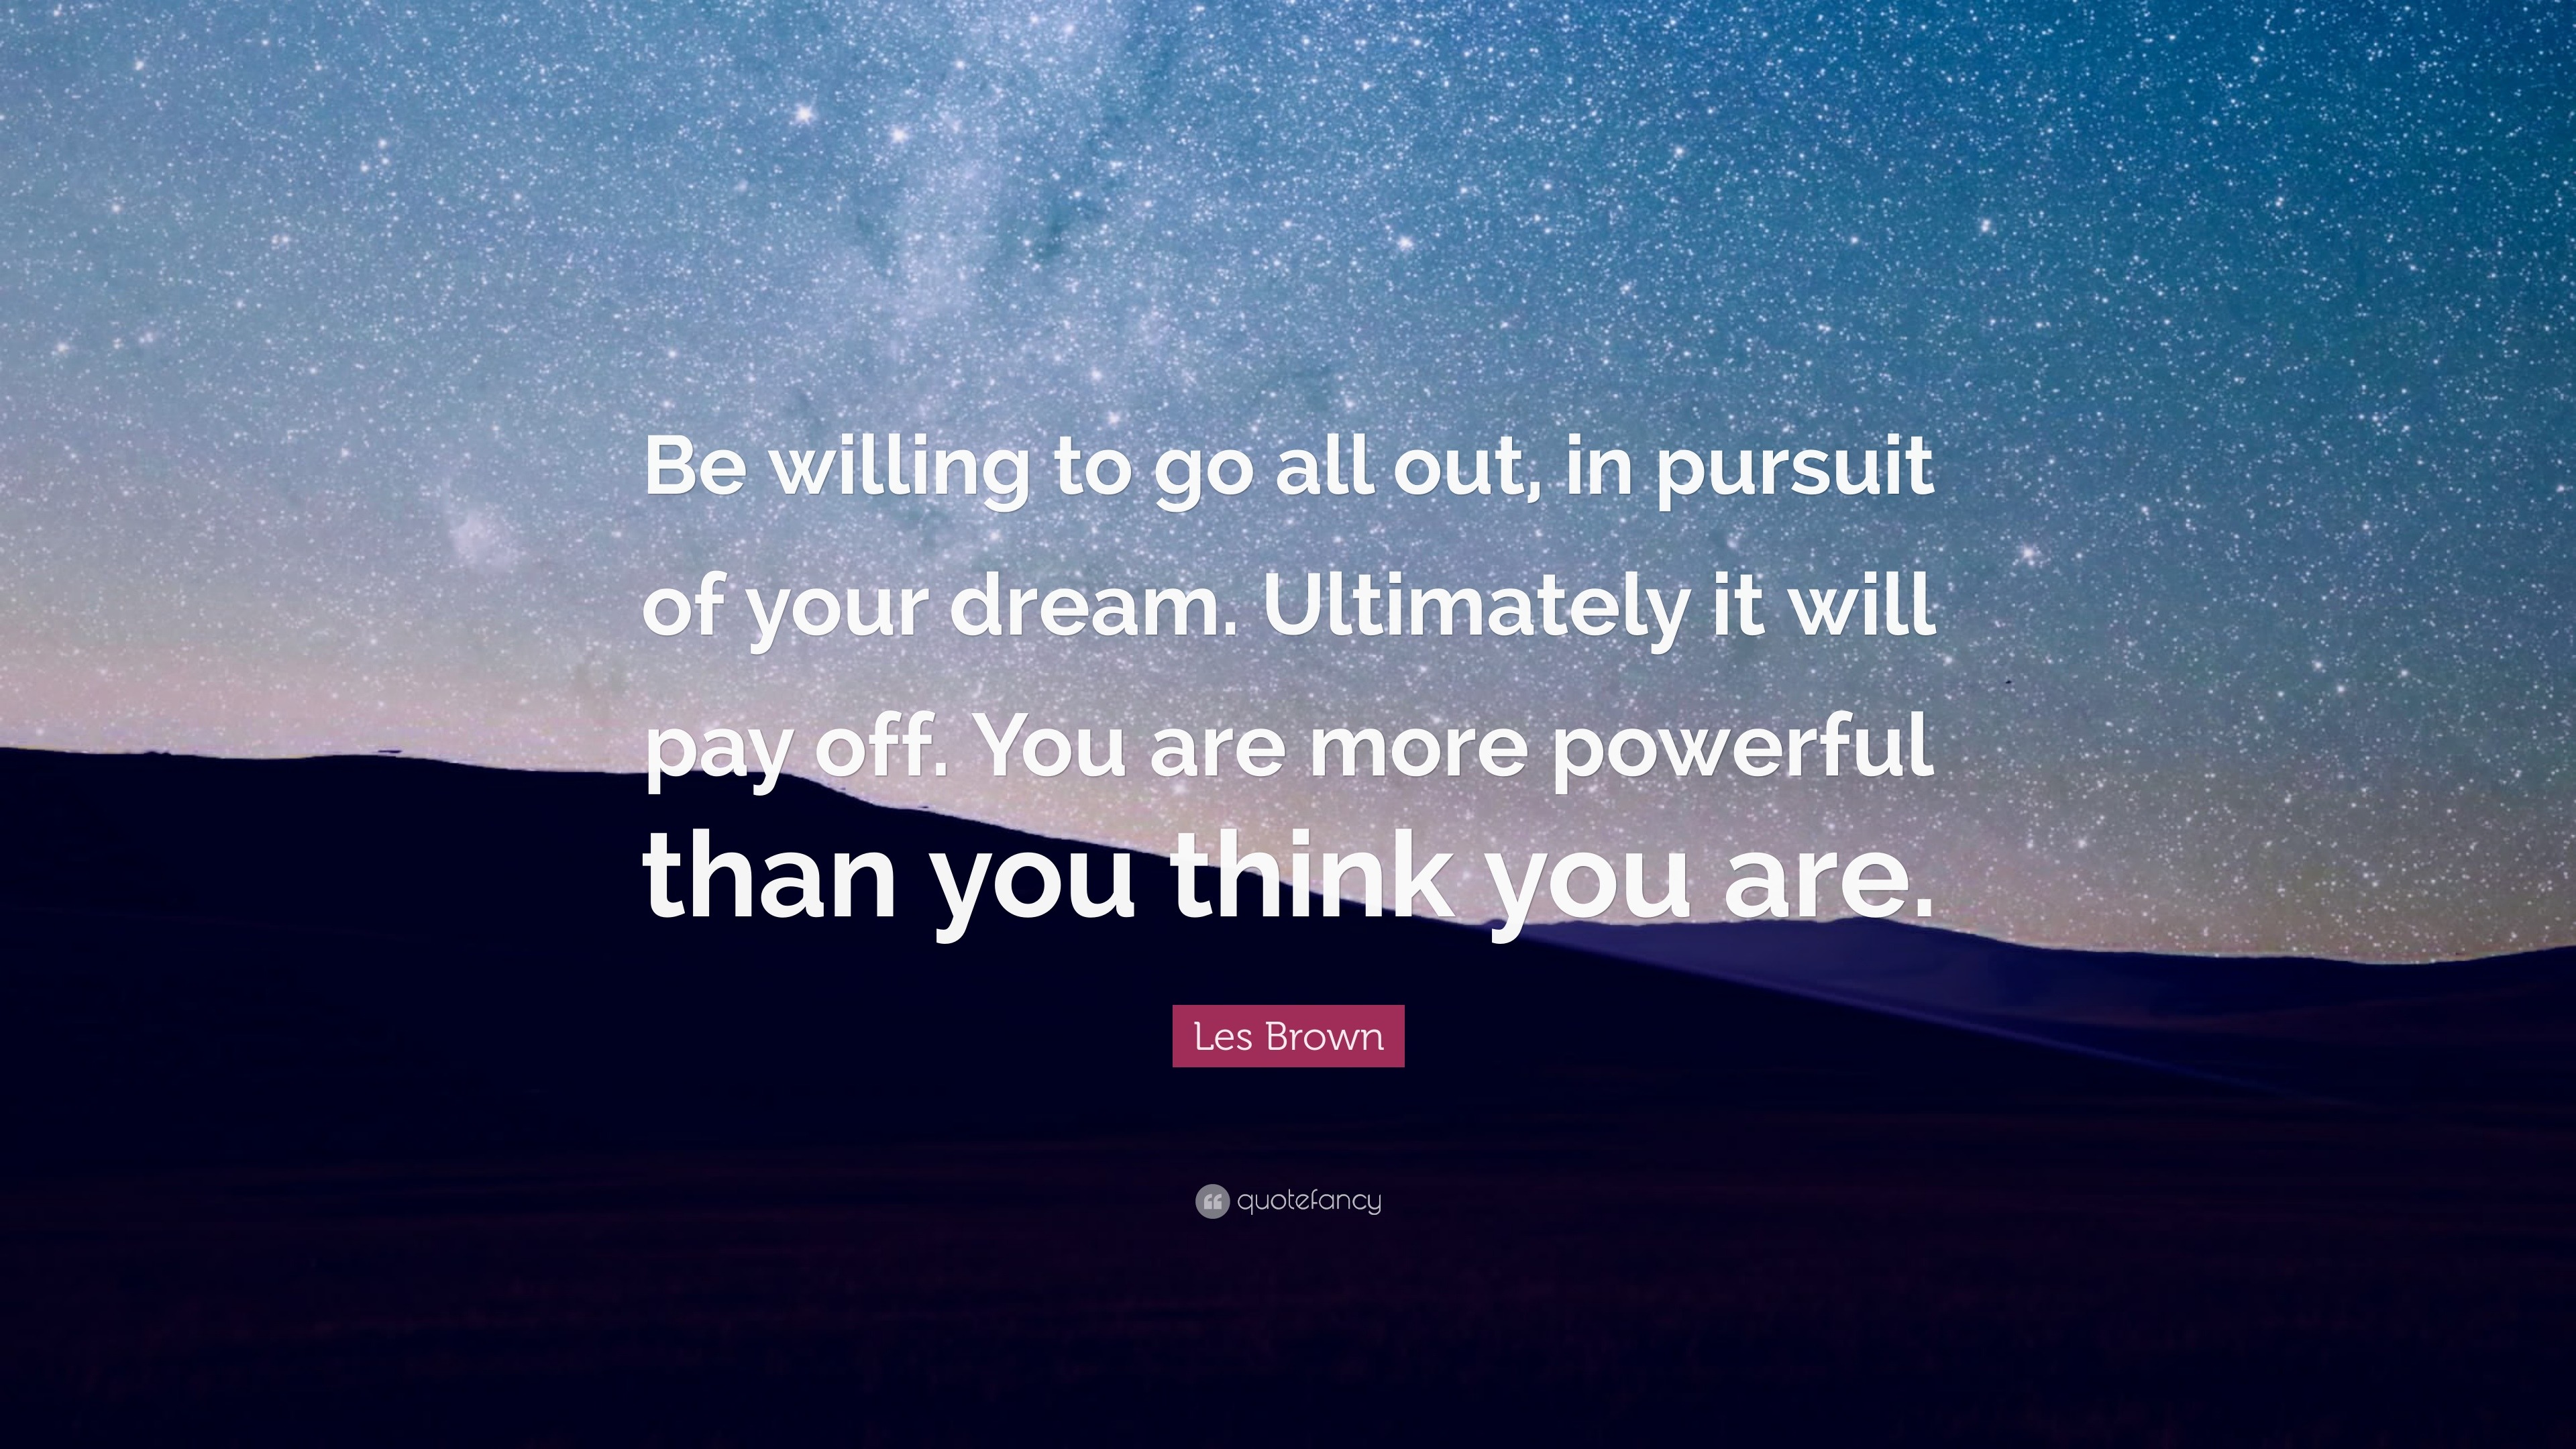 Les Brown Quote: “Be willing to go all out, in pursuit of your dream ...